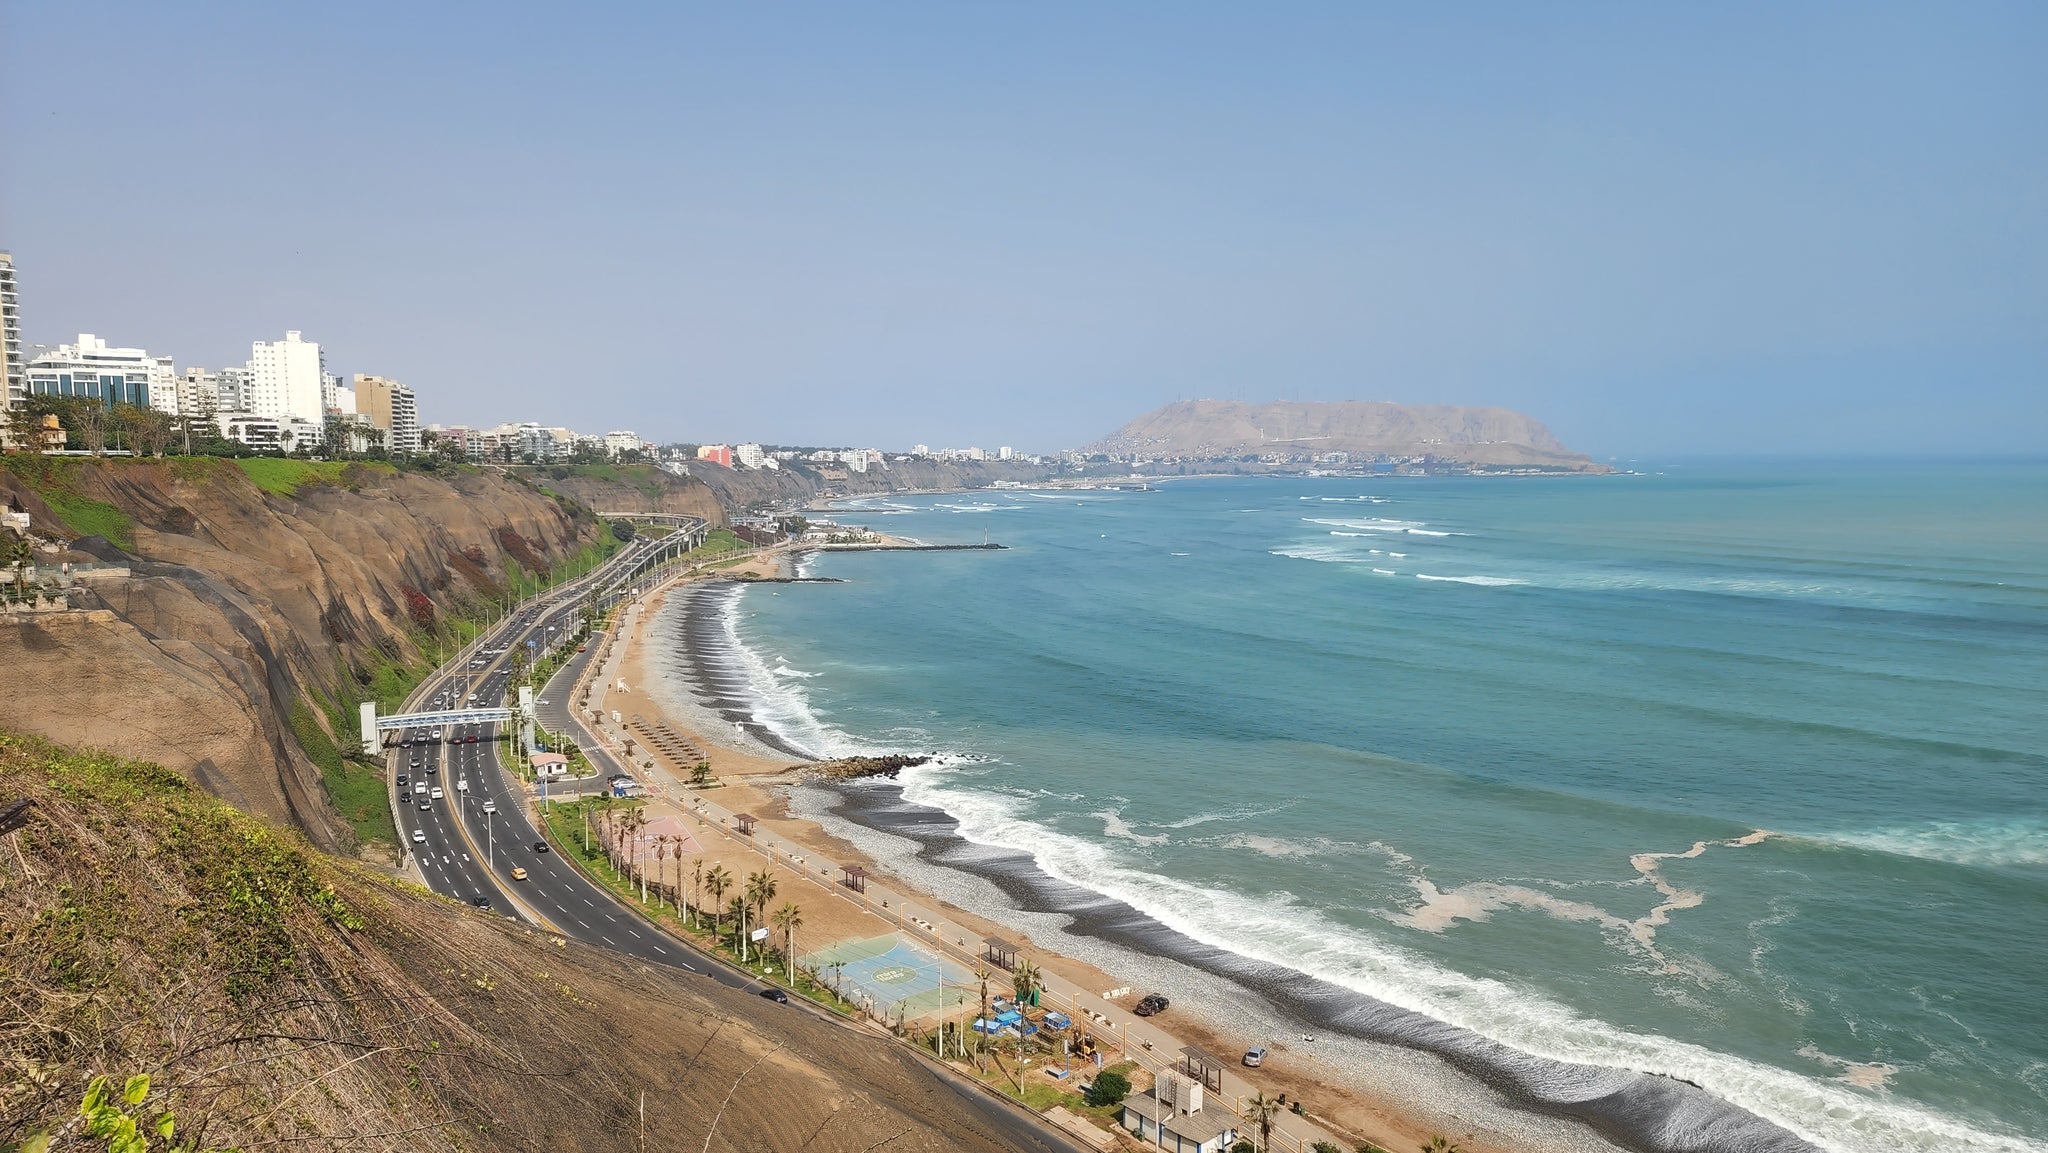 Miraflores and the pacific ocean before heading north to the Cordillera Blanca of Peru